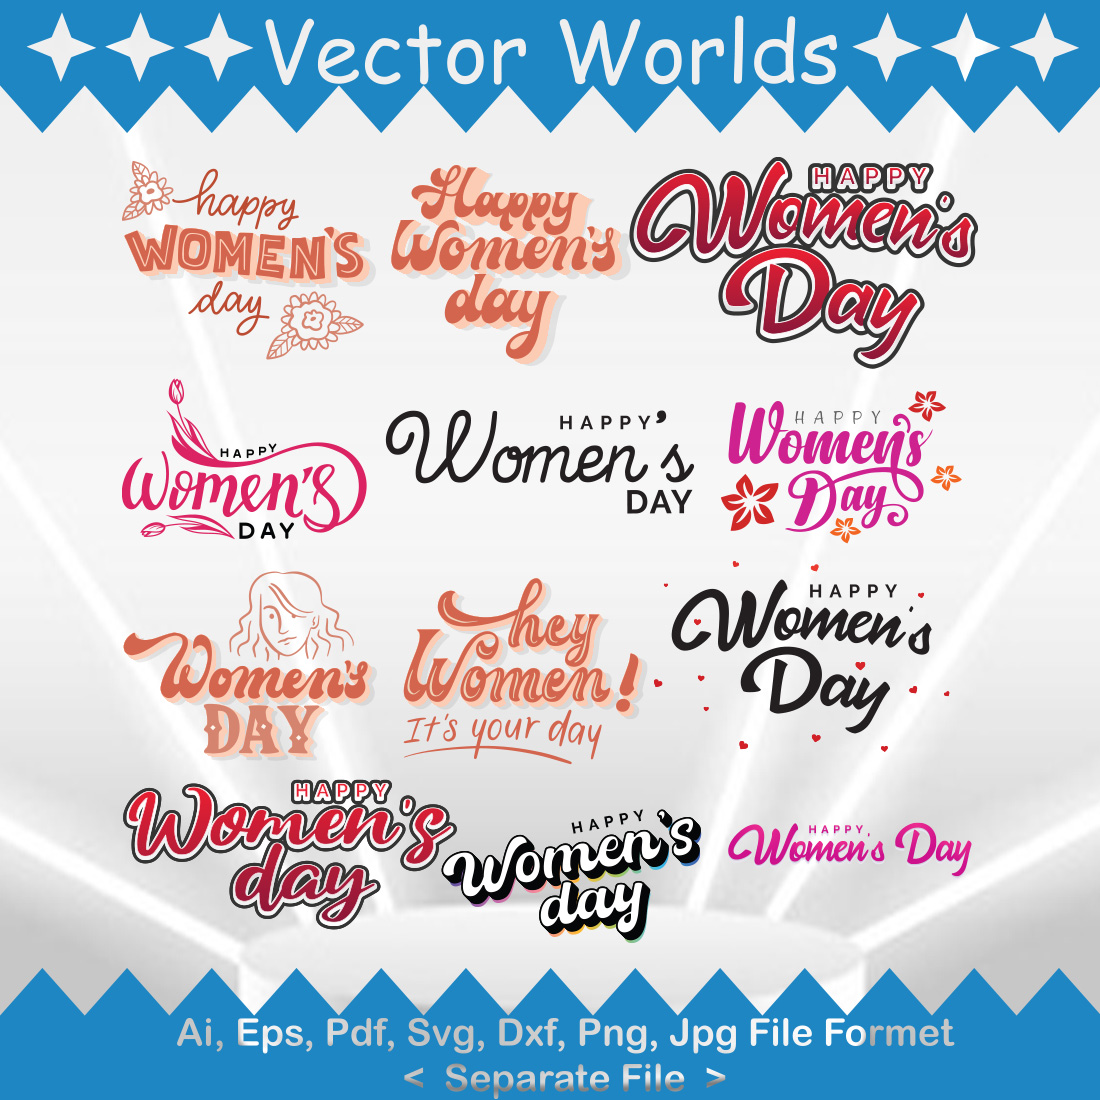 WOMEN'S DAY SVG Vector Design cover image.